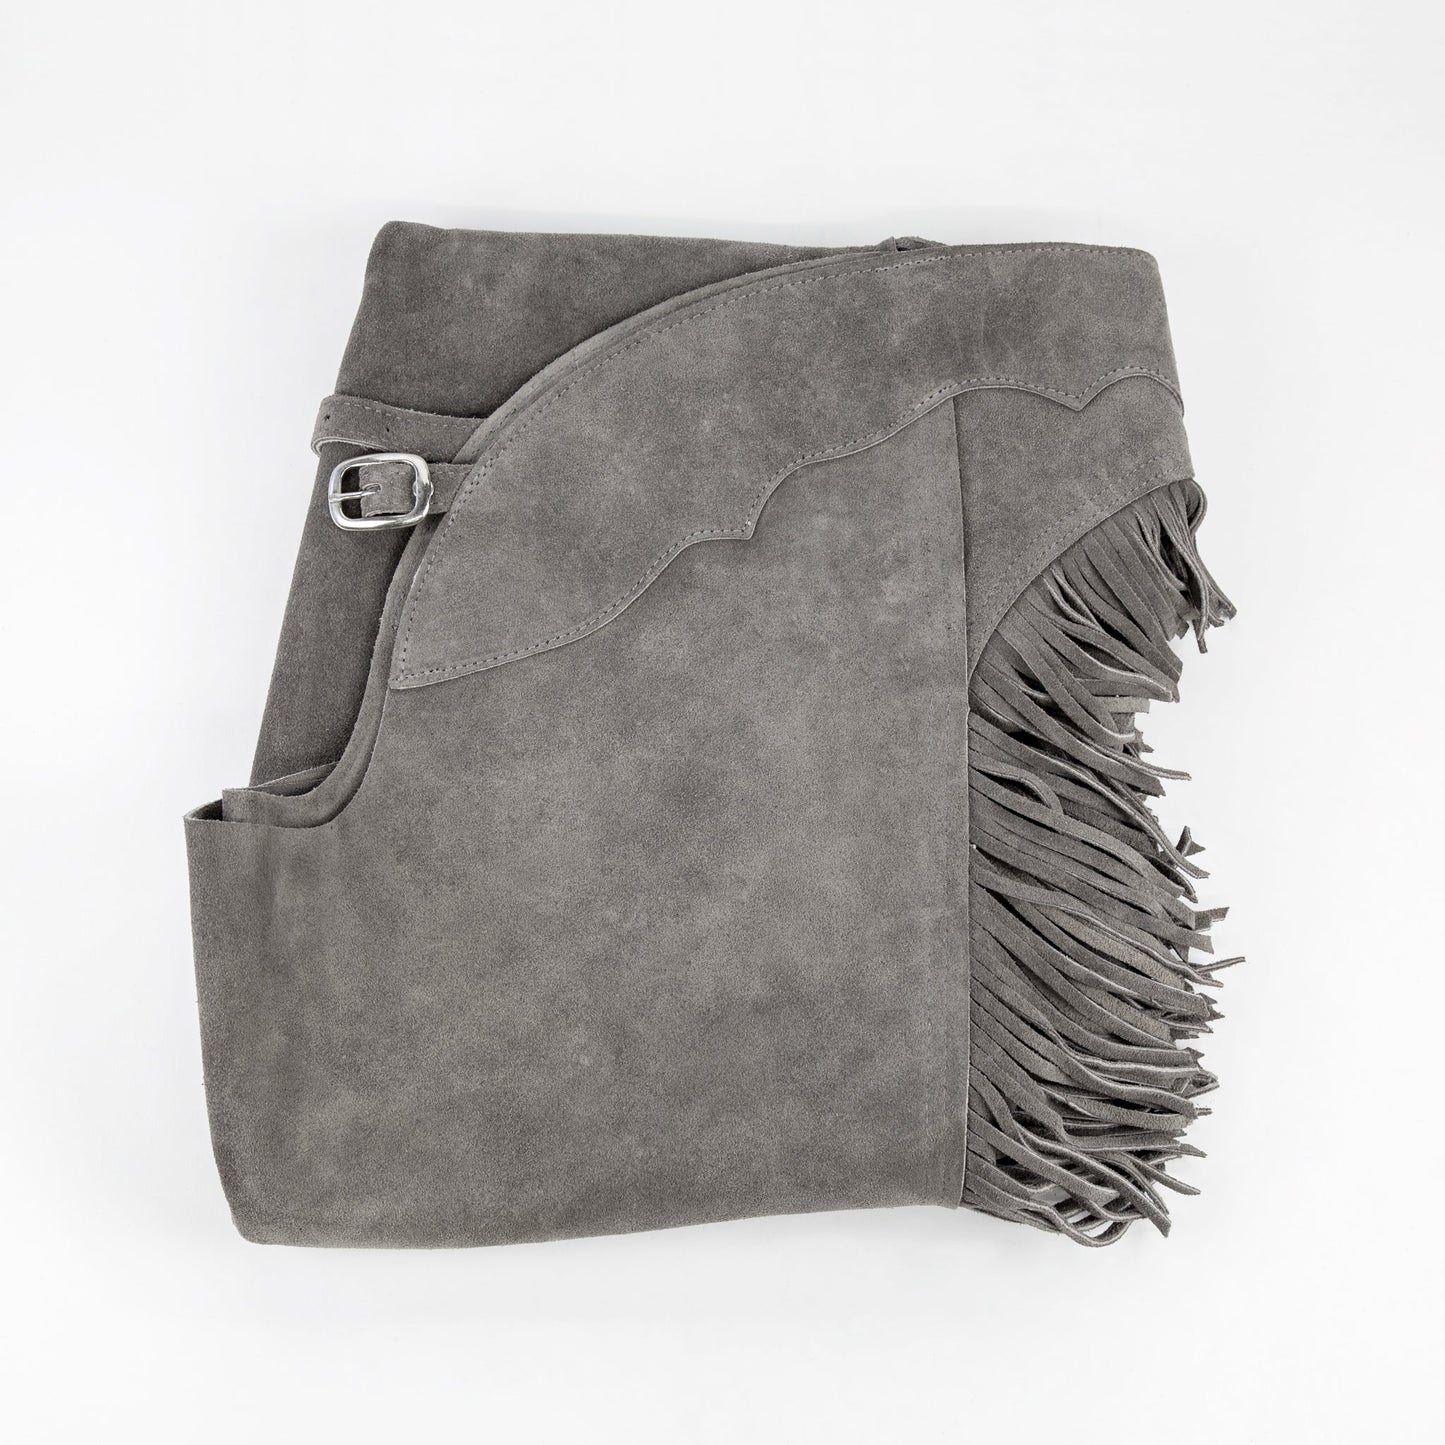 Western Equitation Chaps - Grey Suede - Fringe - Double Concho